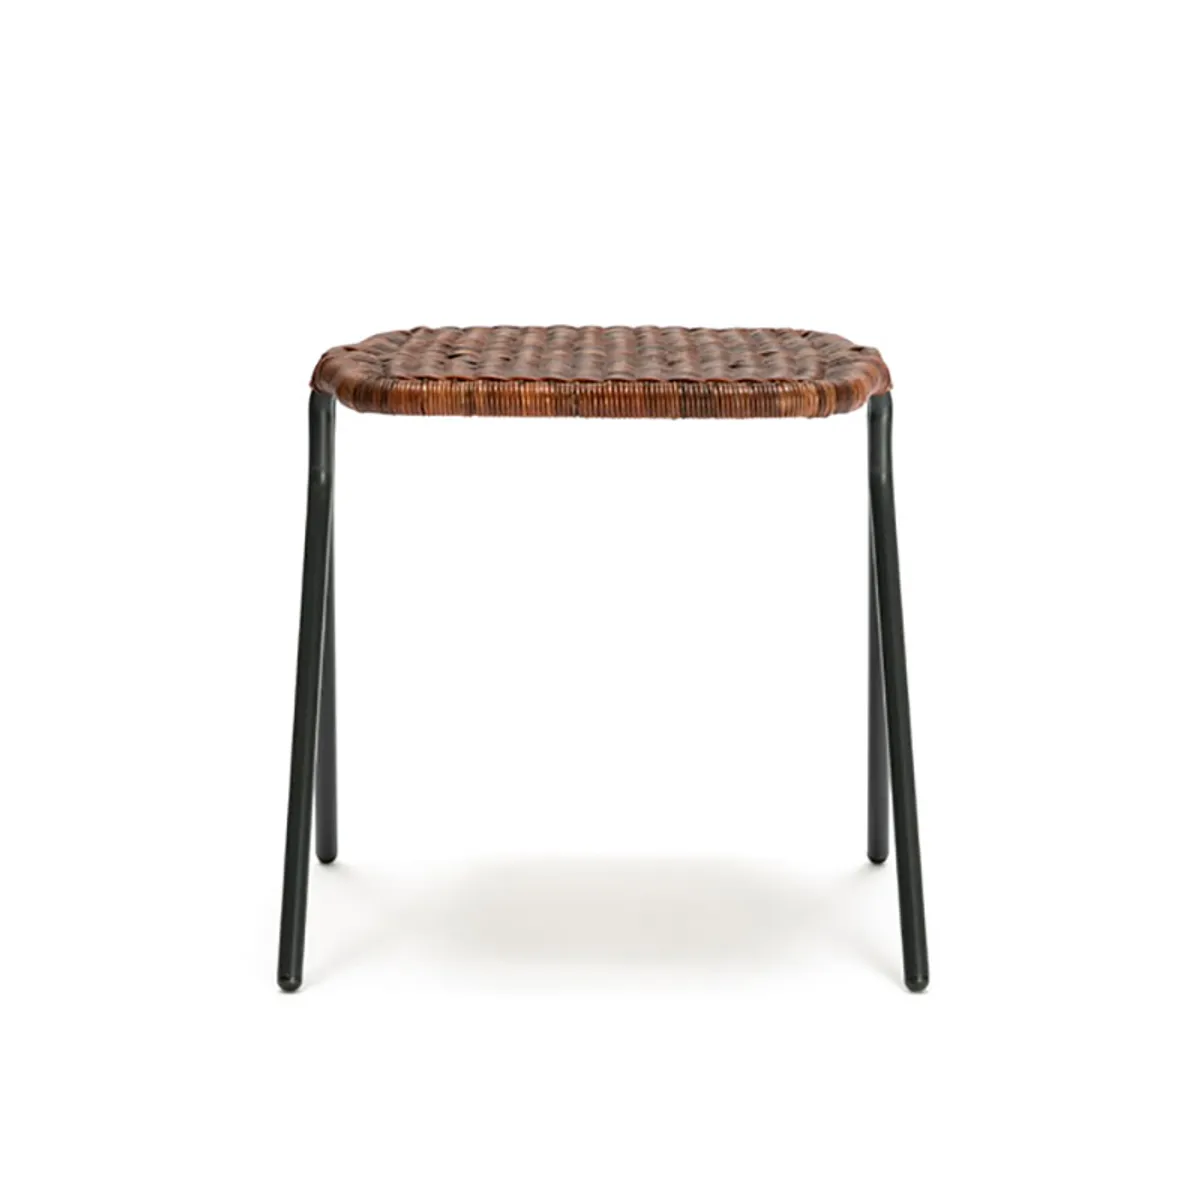 Persi Low Stool Charcoal Rust Rattan And Metal Furniture For Hotels And Cafes 2